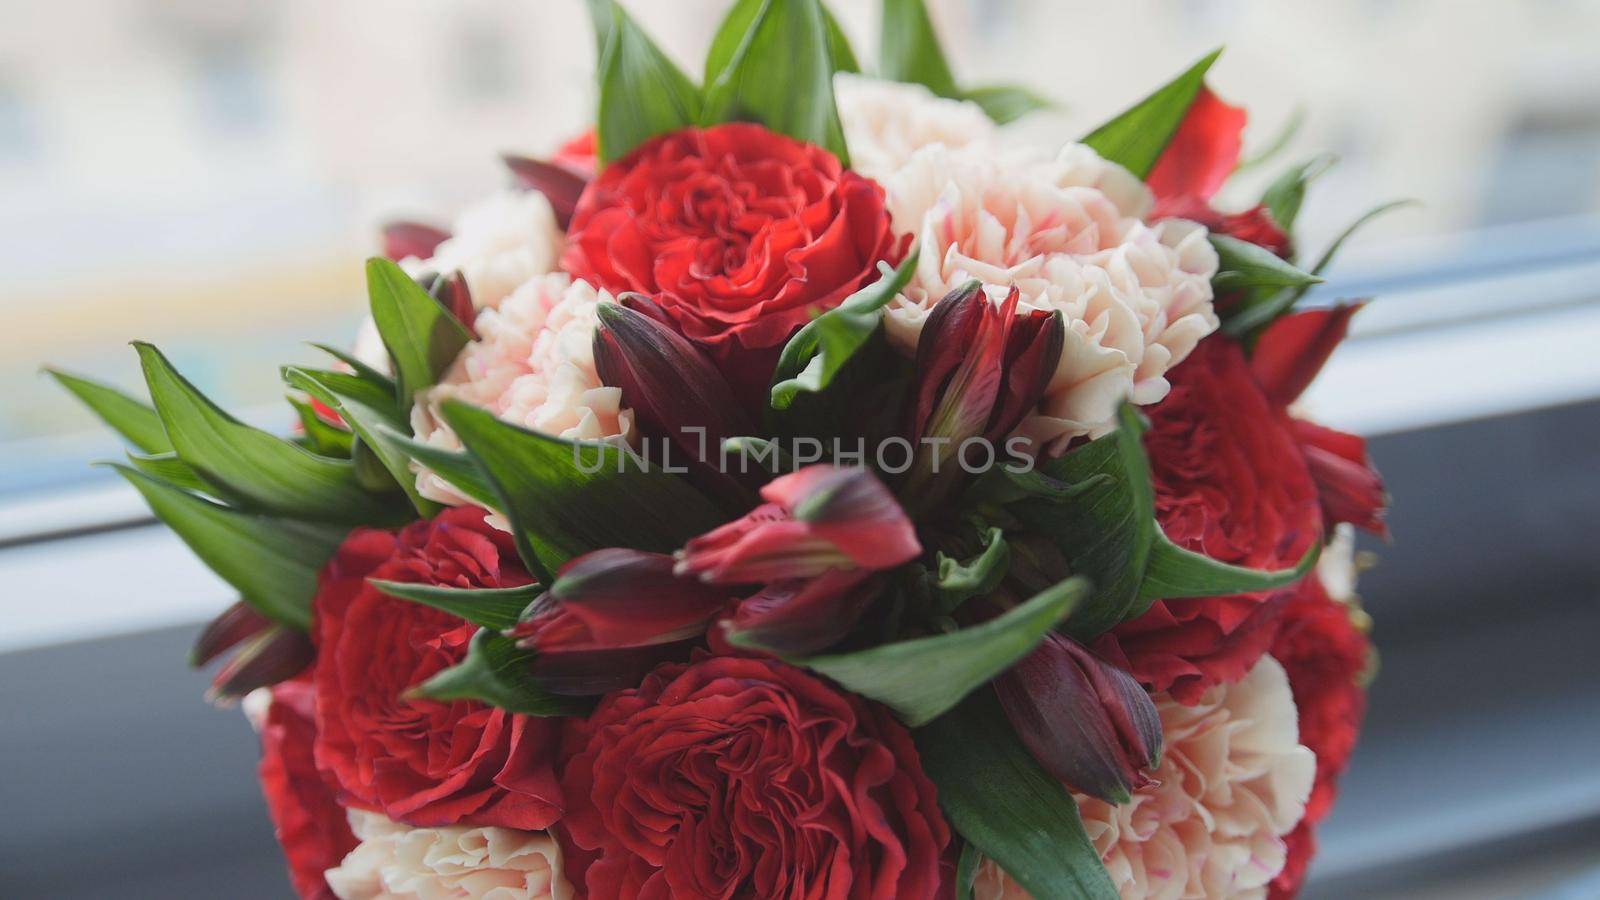 Colorful - red and green - wedding flowers - bride's bouquet at window, horizontal, close-up